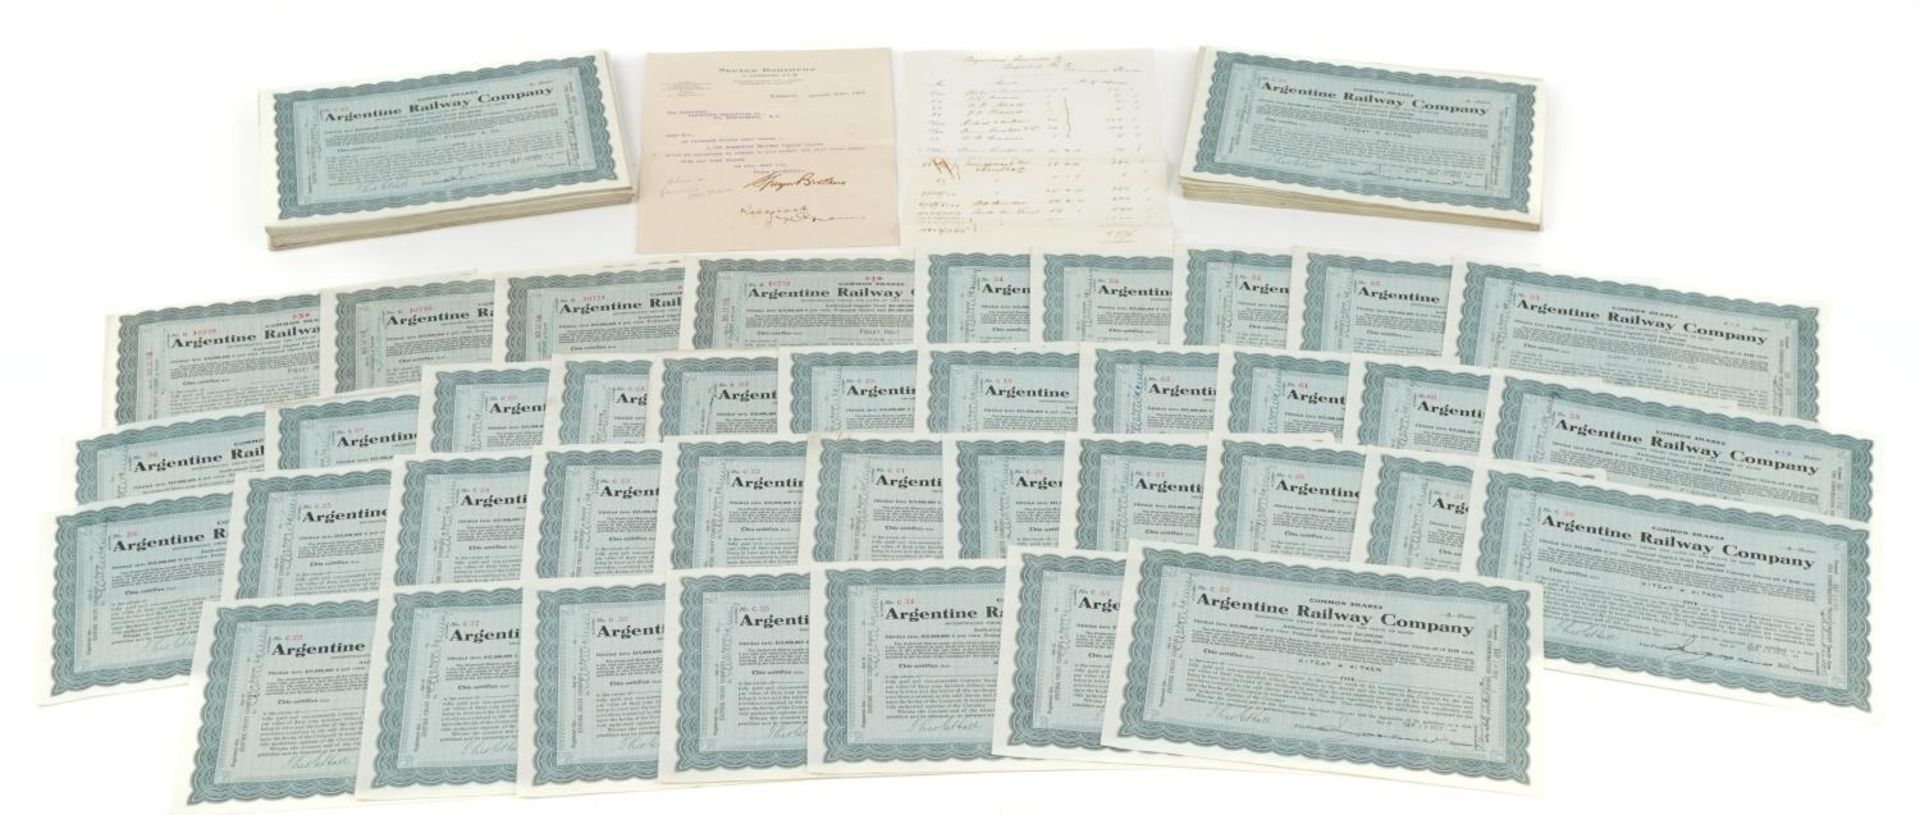 Extensive collection of early 20th century Argentine Railway Company share certificates